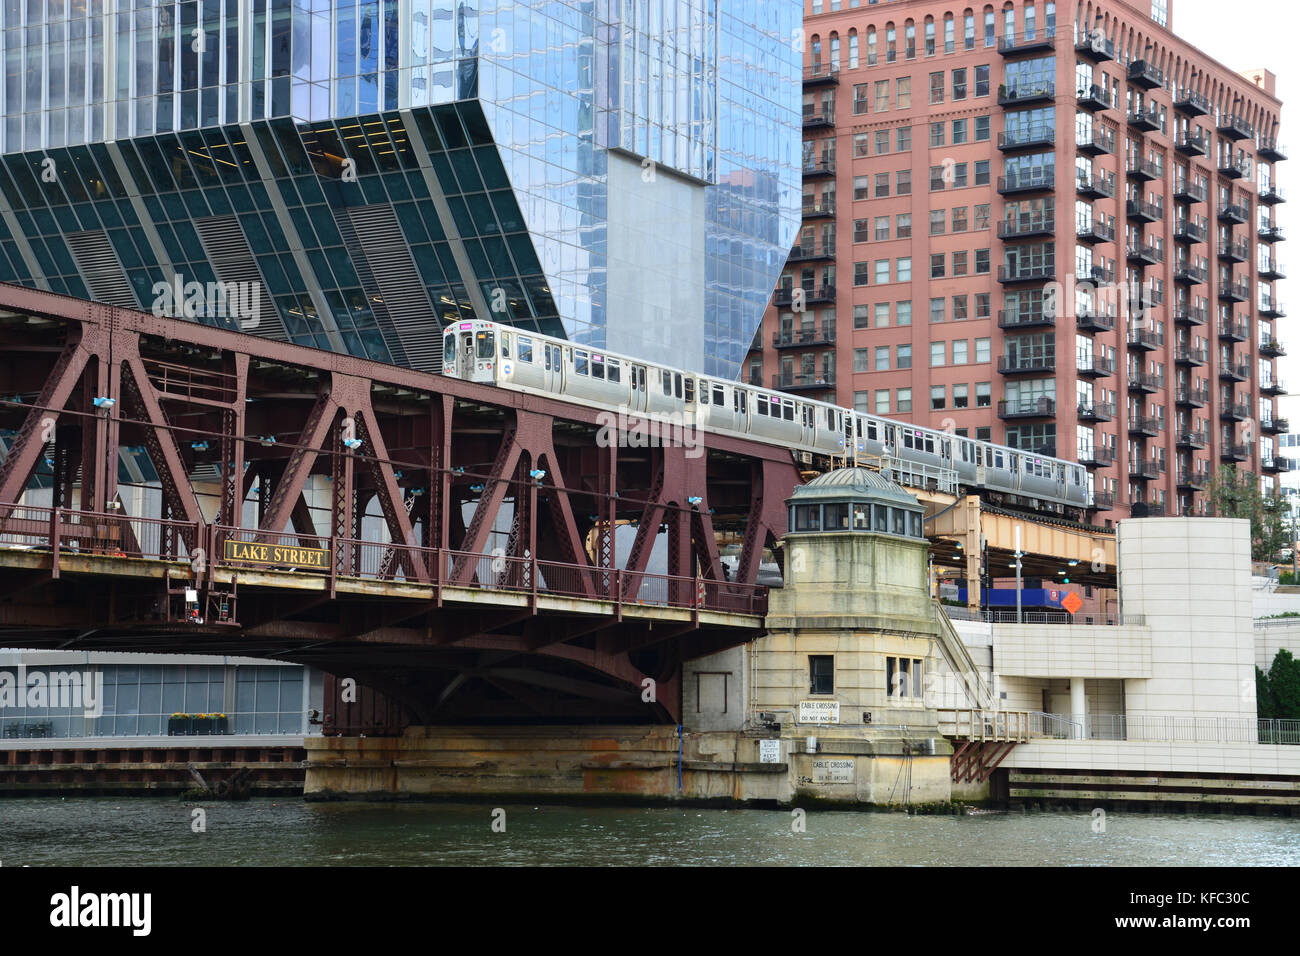 A pink line L train crosses the Chicago River at Lake Street in front of the cantilevered skyscraper at 150 N Riverside in Chicago Stock Photo